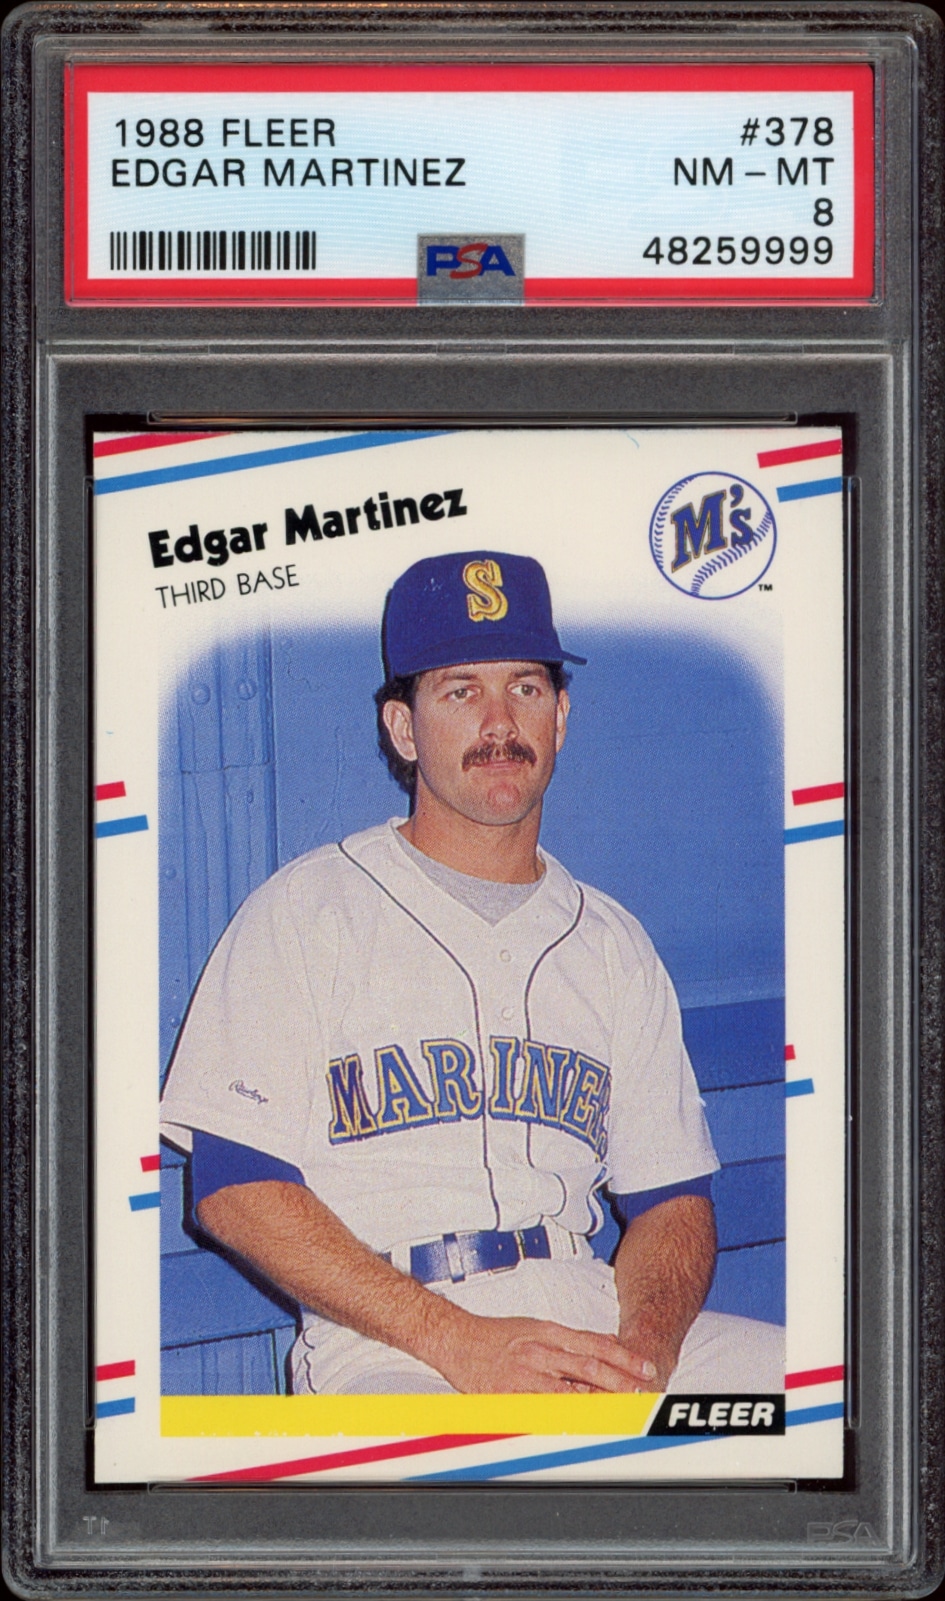 Graded 1988 Fleer baseball card featuring Edgar Martinez, Seattle Mariners star, rated NM-MT 8 by PSA.